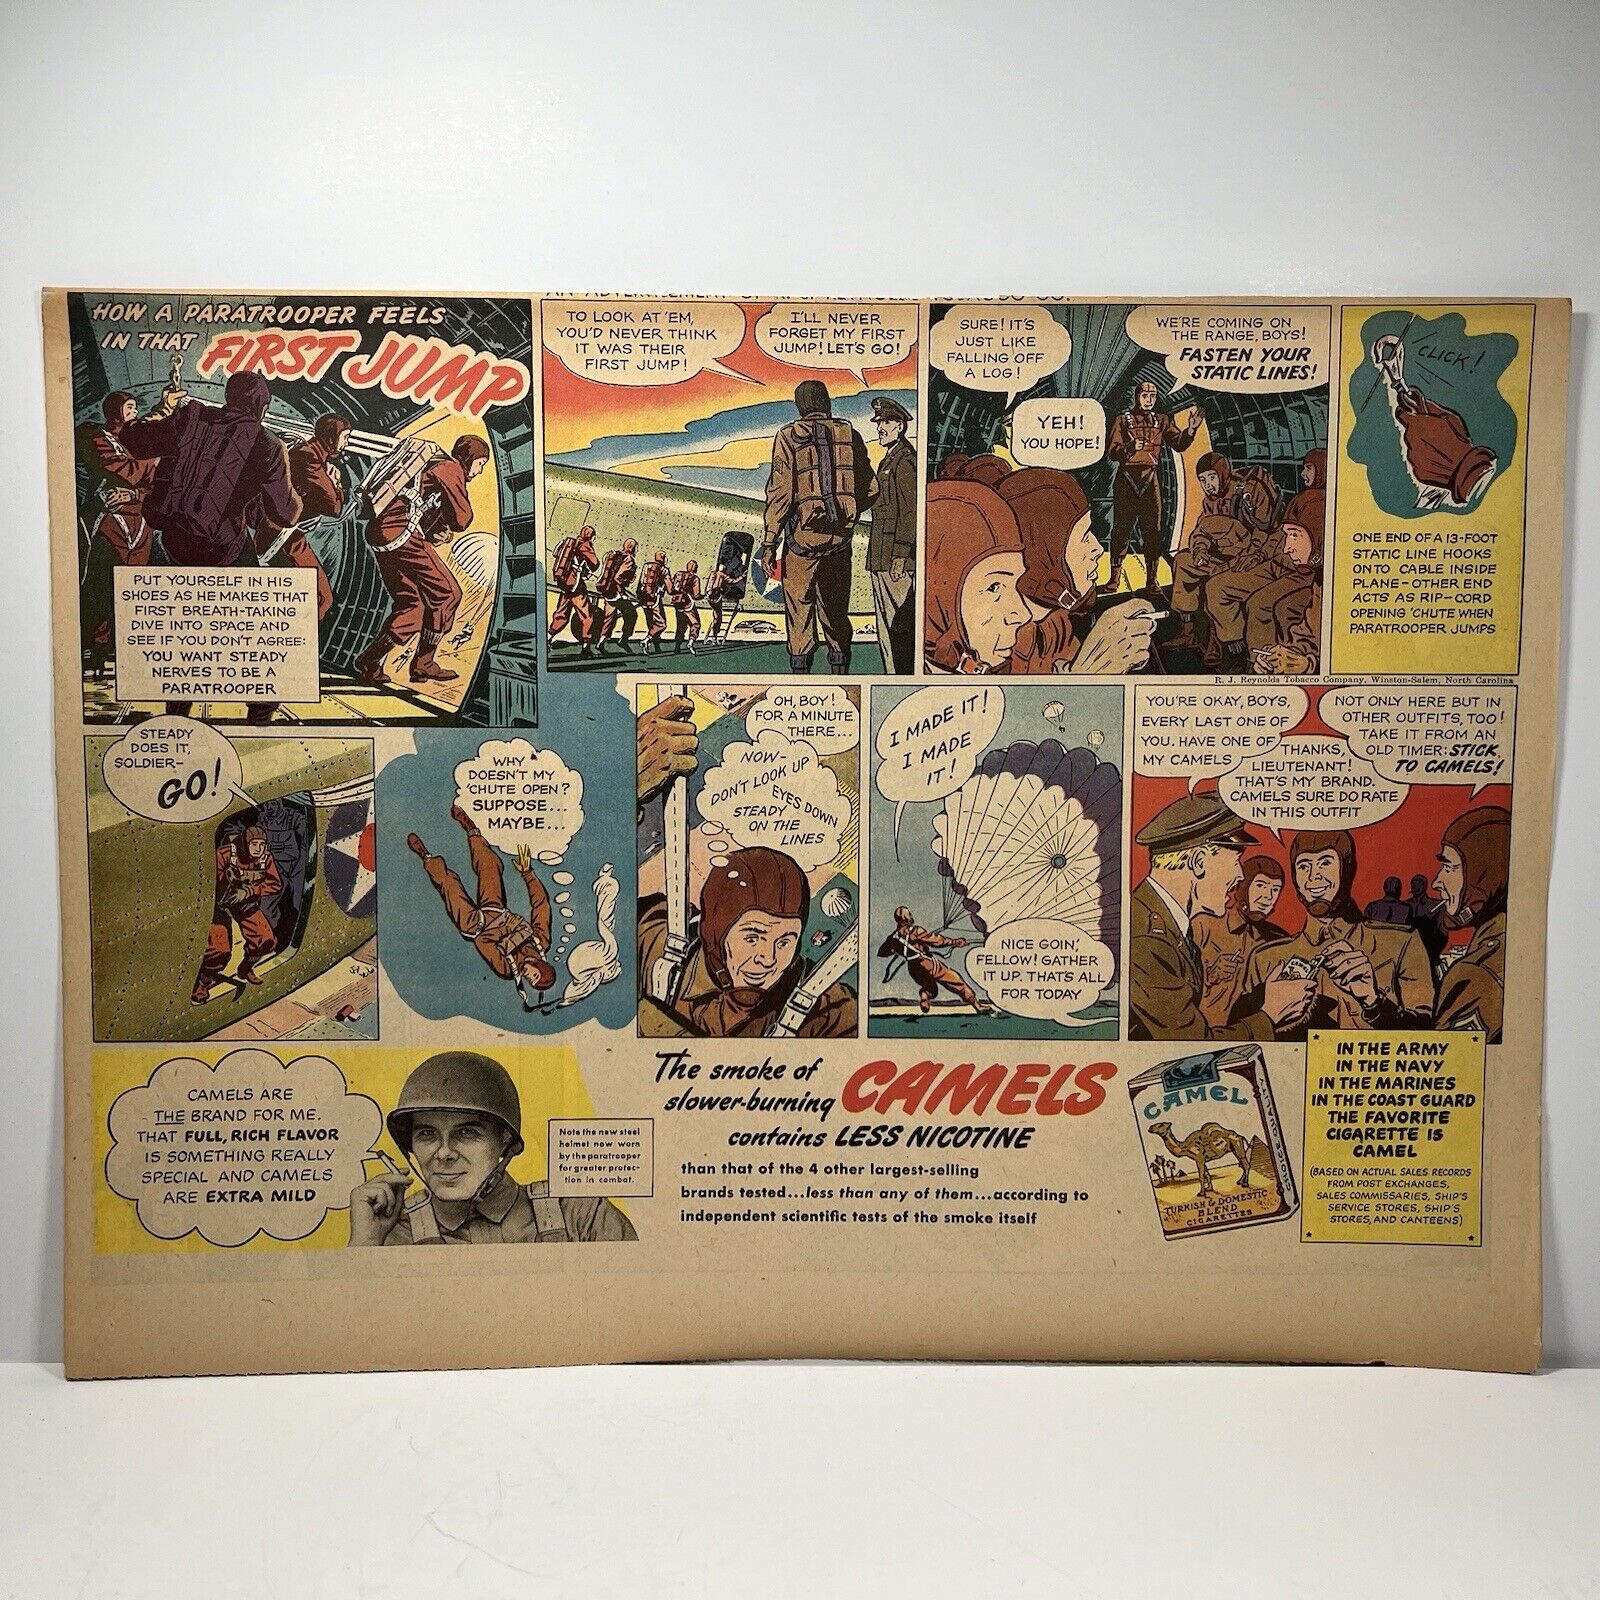 WWII 1942 Camel Cigarettes Paratroopers First Jump Newspaper Comic Strip Add WW2